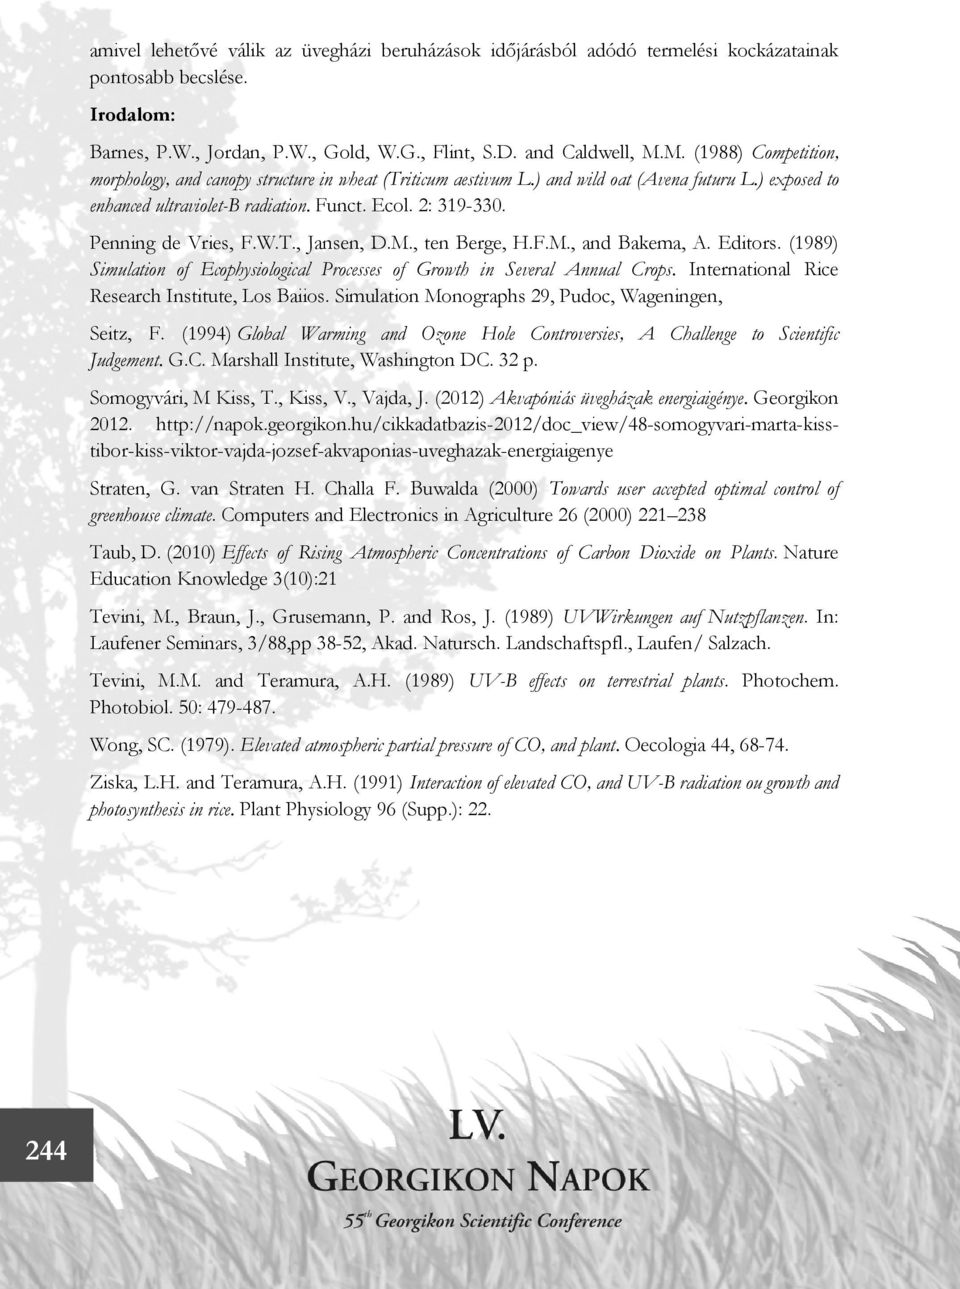 Penning de Vries, F.W.T., Jansen, D.M., ten Berge, H.F.M., and Bakema, A. Editors. (1989) Simulation of Ecophysiological Processes of Growth in Several Annual Crops.